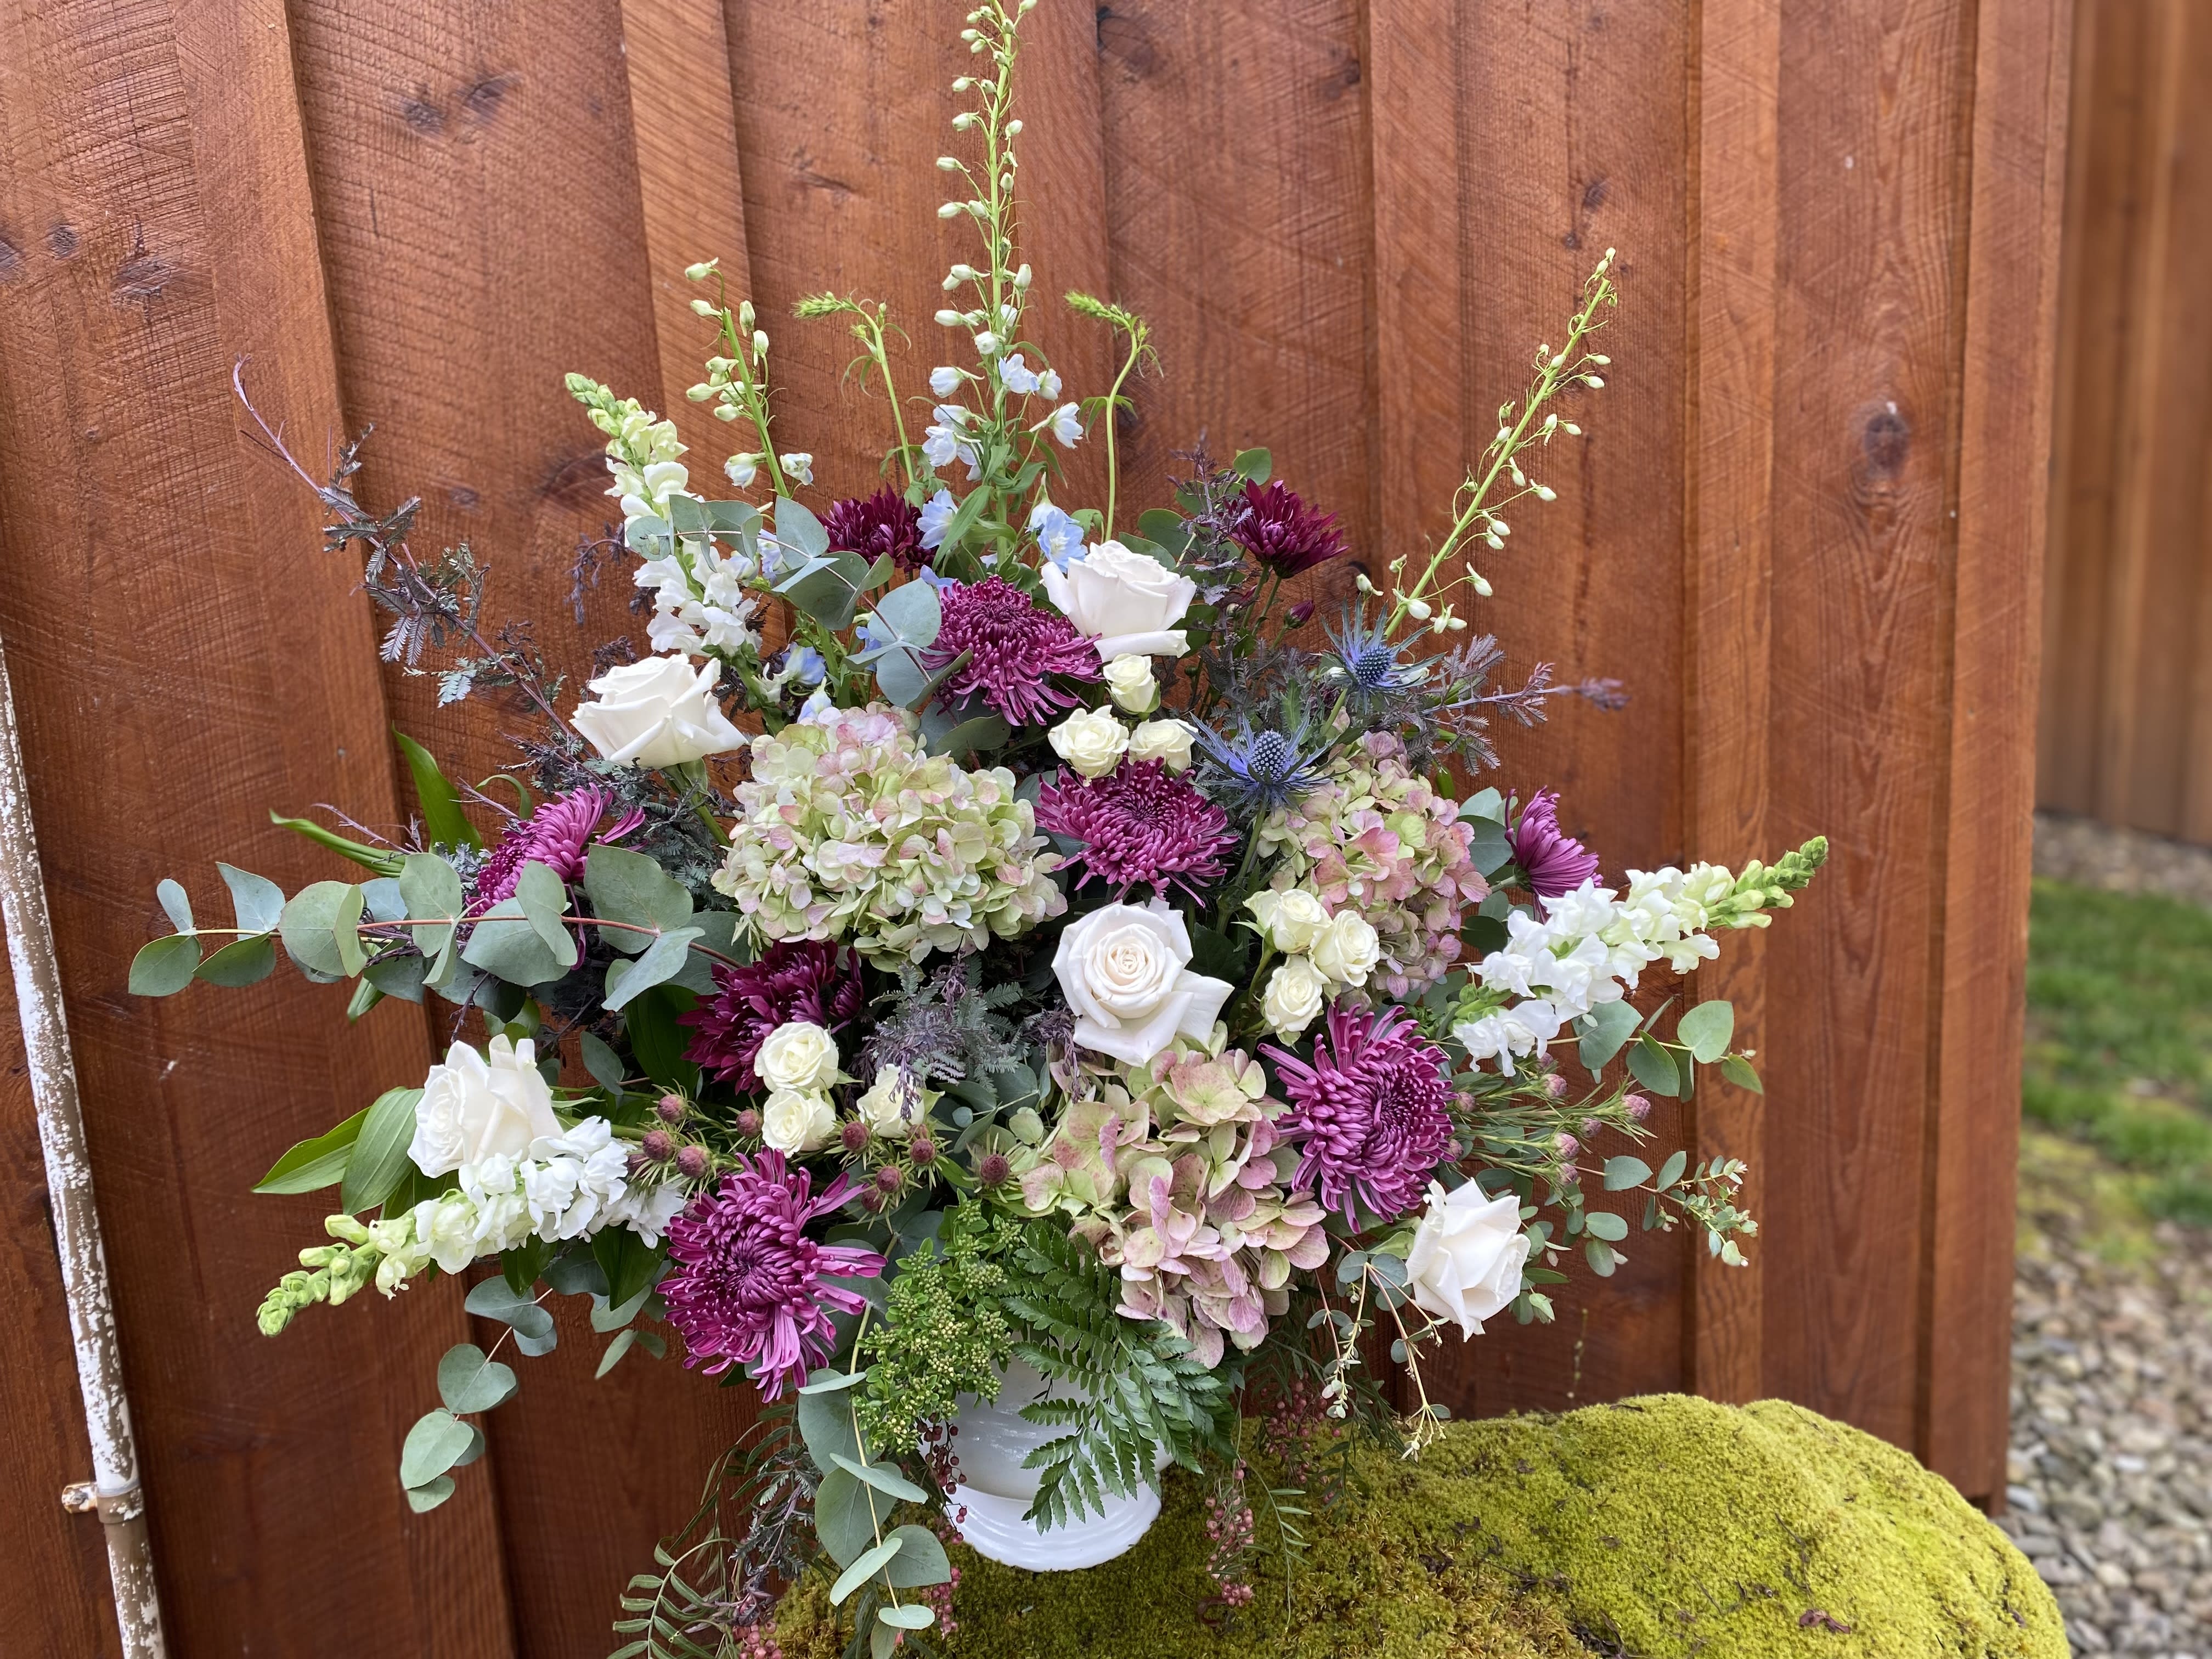 Rustic garden floor basket  - Large arrangement suitable for funeral or home . Approx 24” tall. Premium blooms such as hydrangea, roses, Snap dragons or Larkspur , Delfinium,  and mums . Shown as deluxe and premium.  